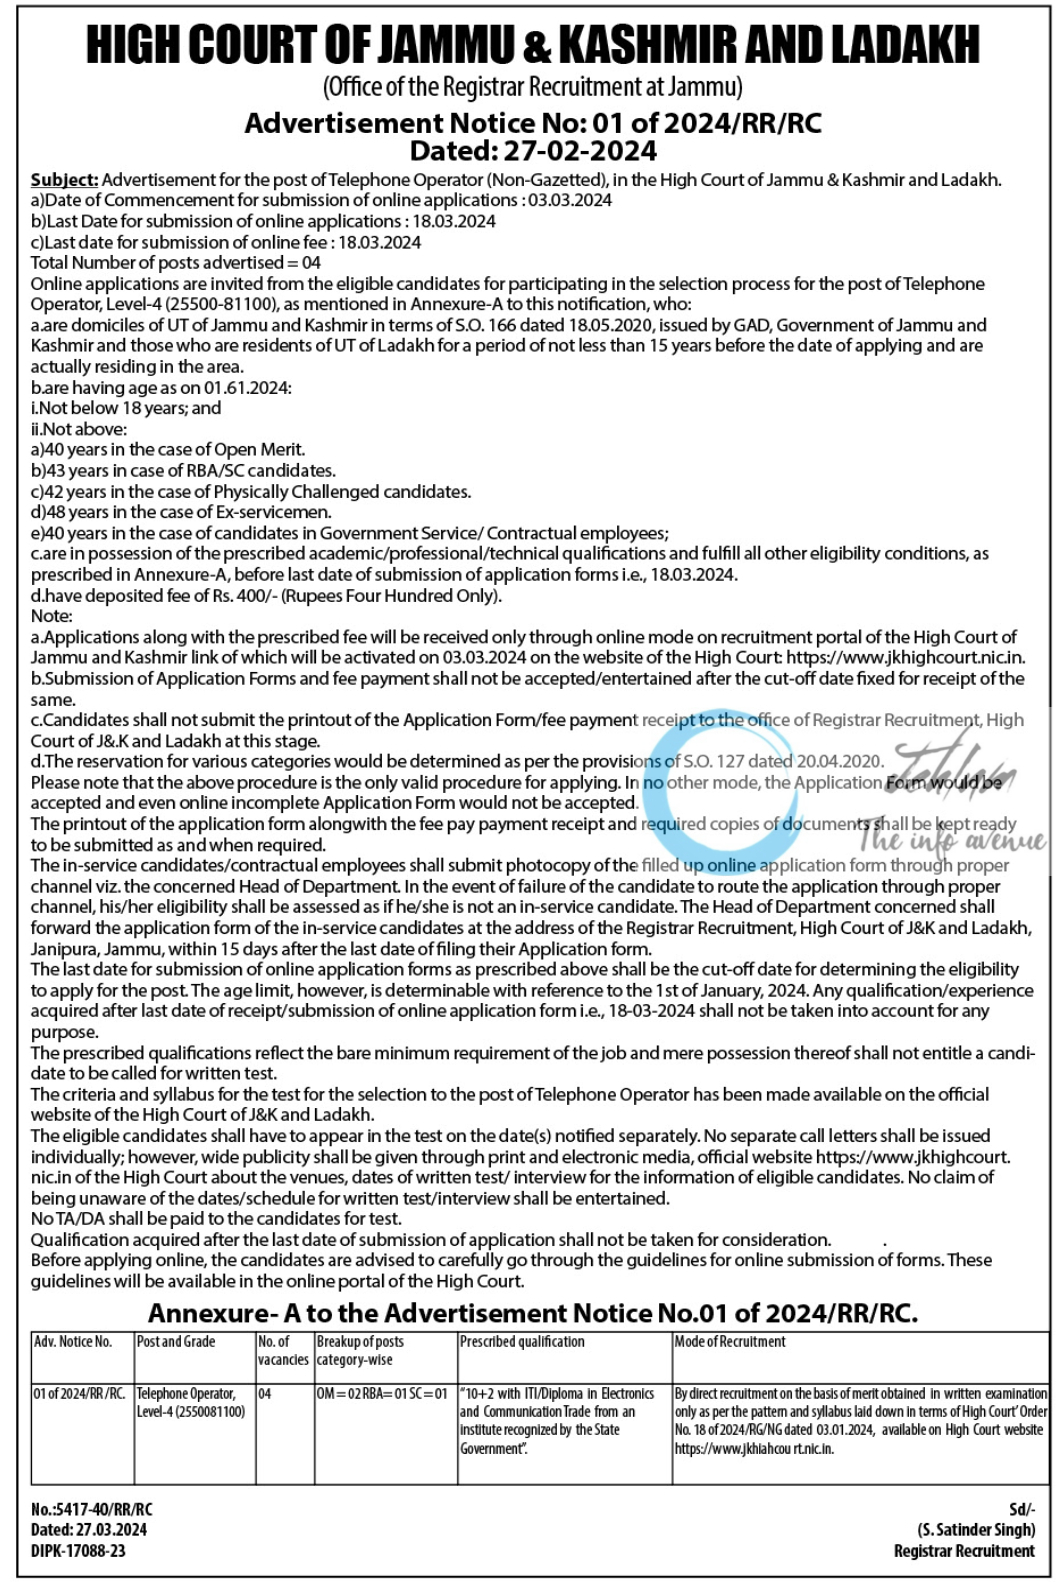 HIGH COURT OF JAMMU AND KASHMIR AND LADAKH JOBS ADVERTISEMENT NOTICE NO 01 OF 2024